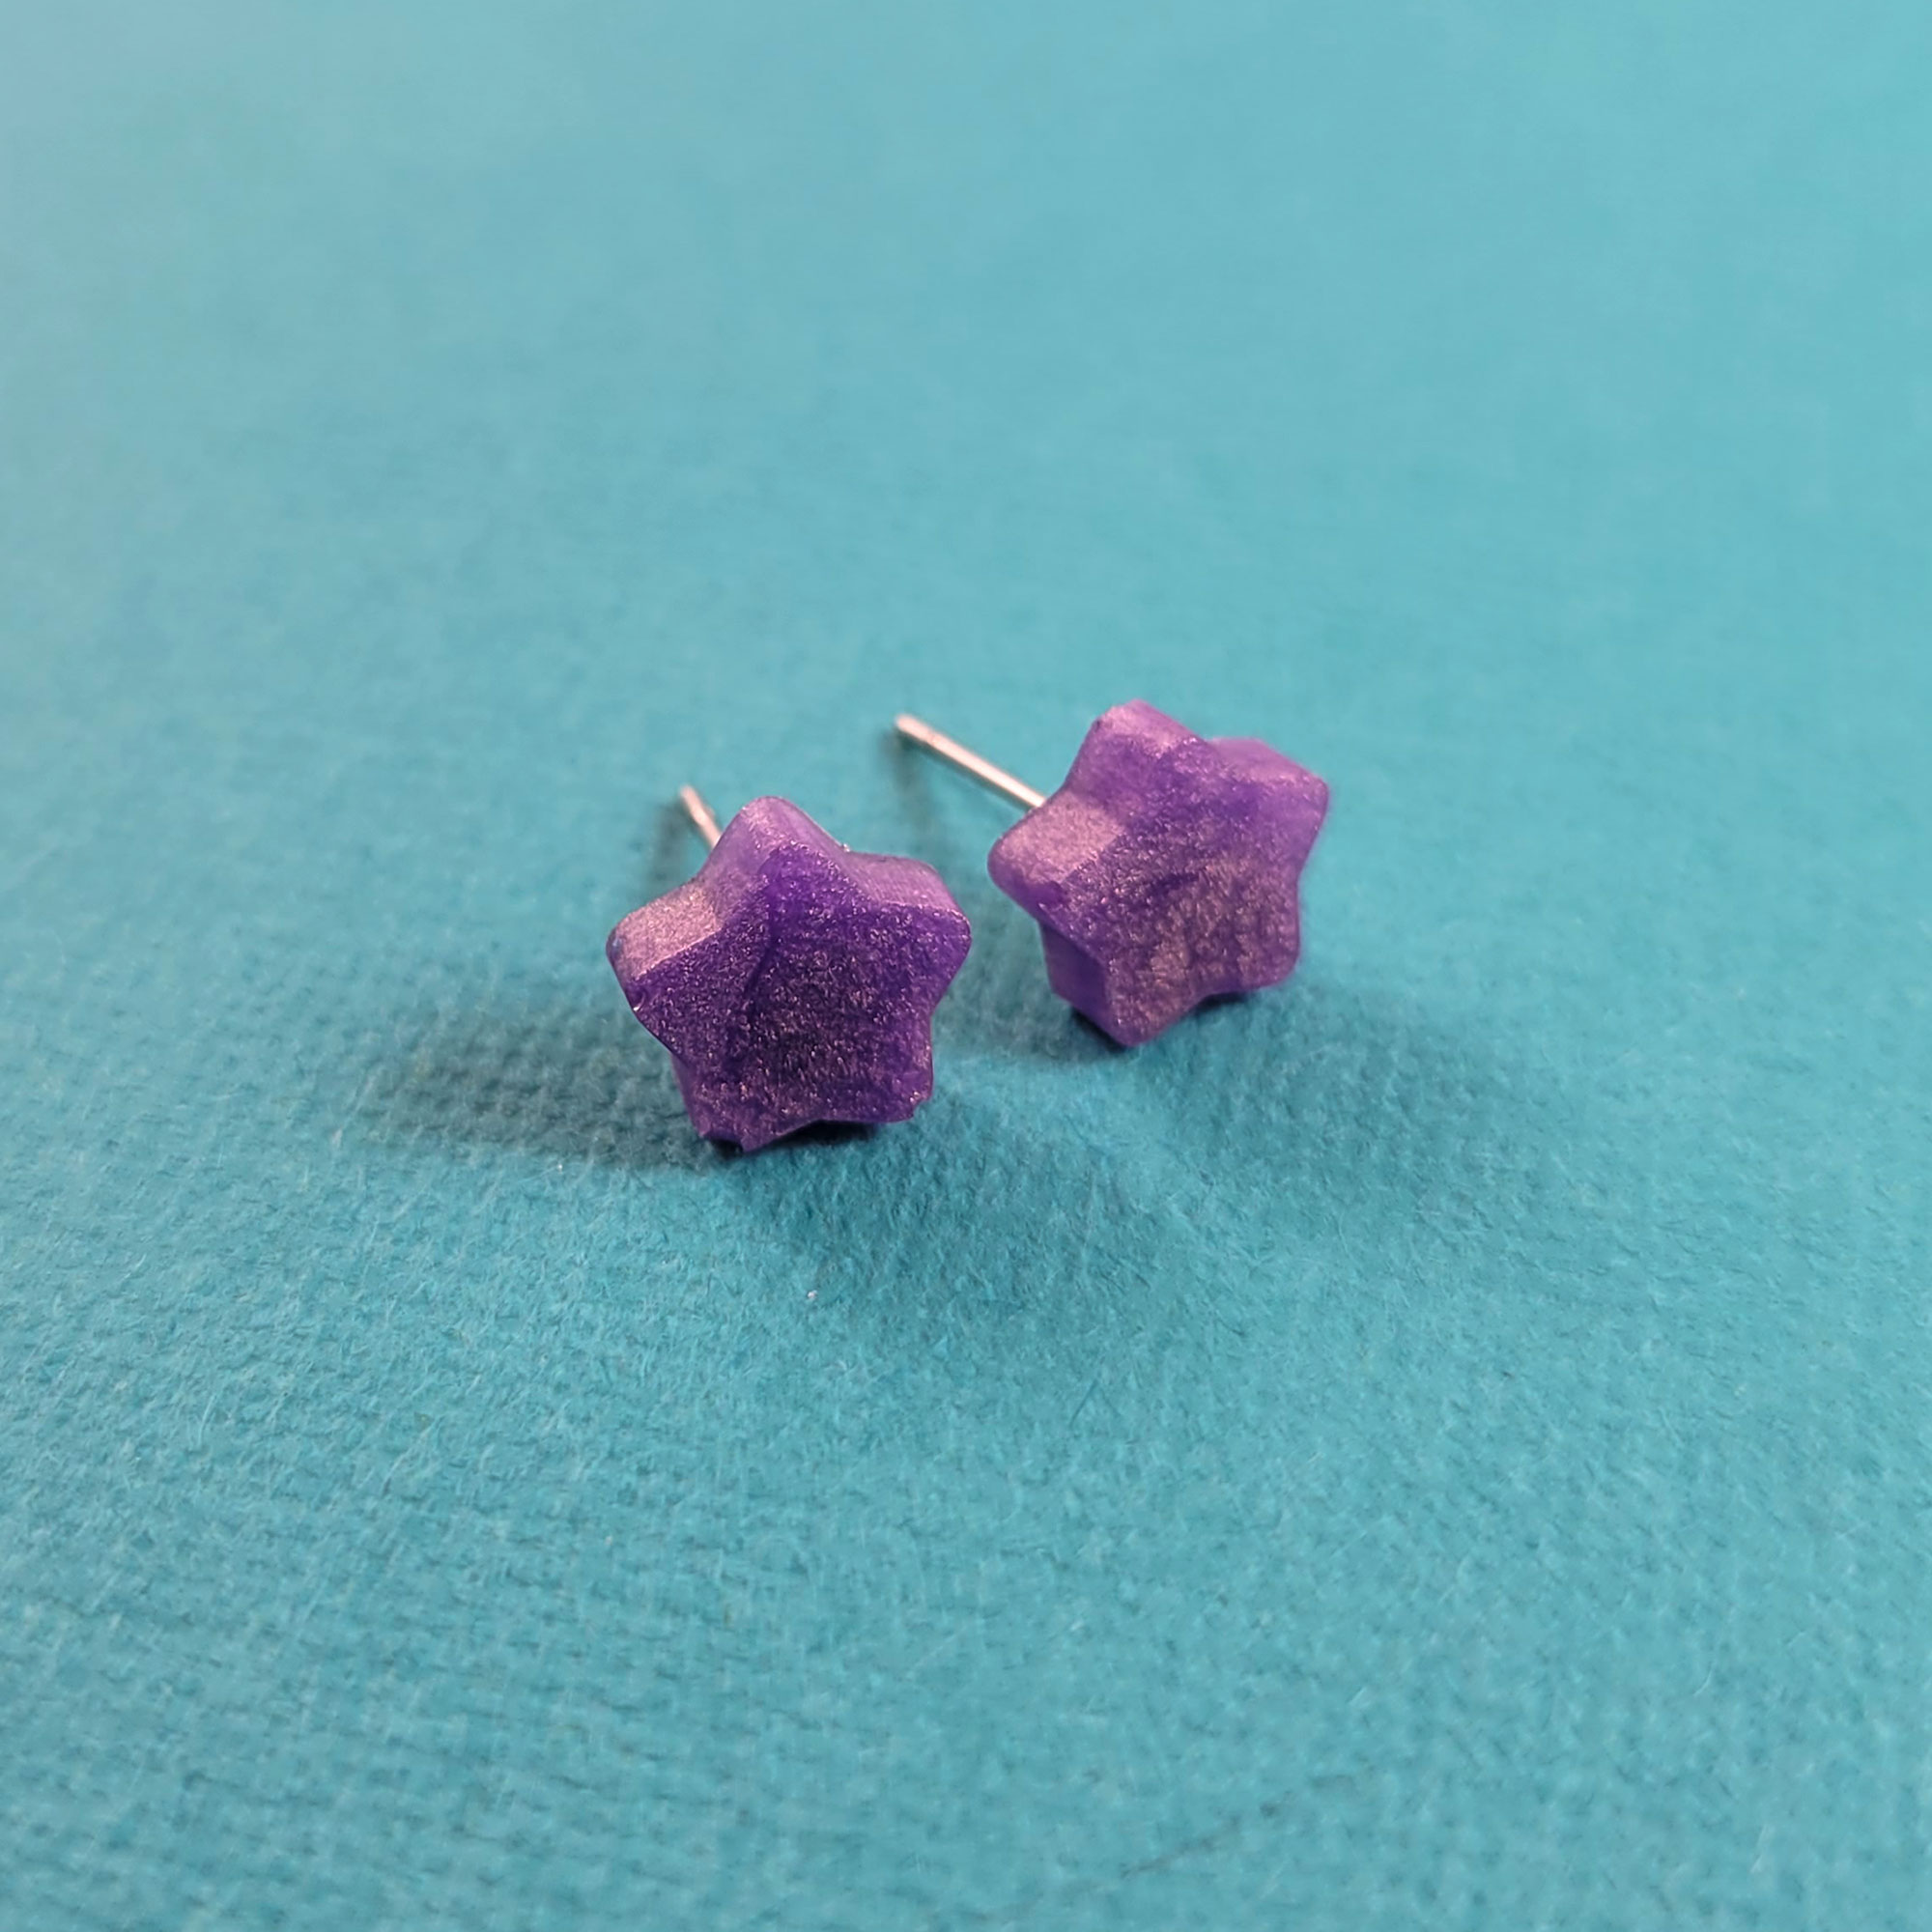 Tiny Star Stud Earrings in Color Shifting Purple by Wilde Designs